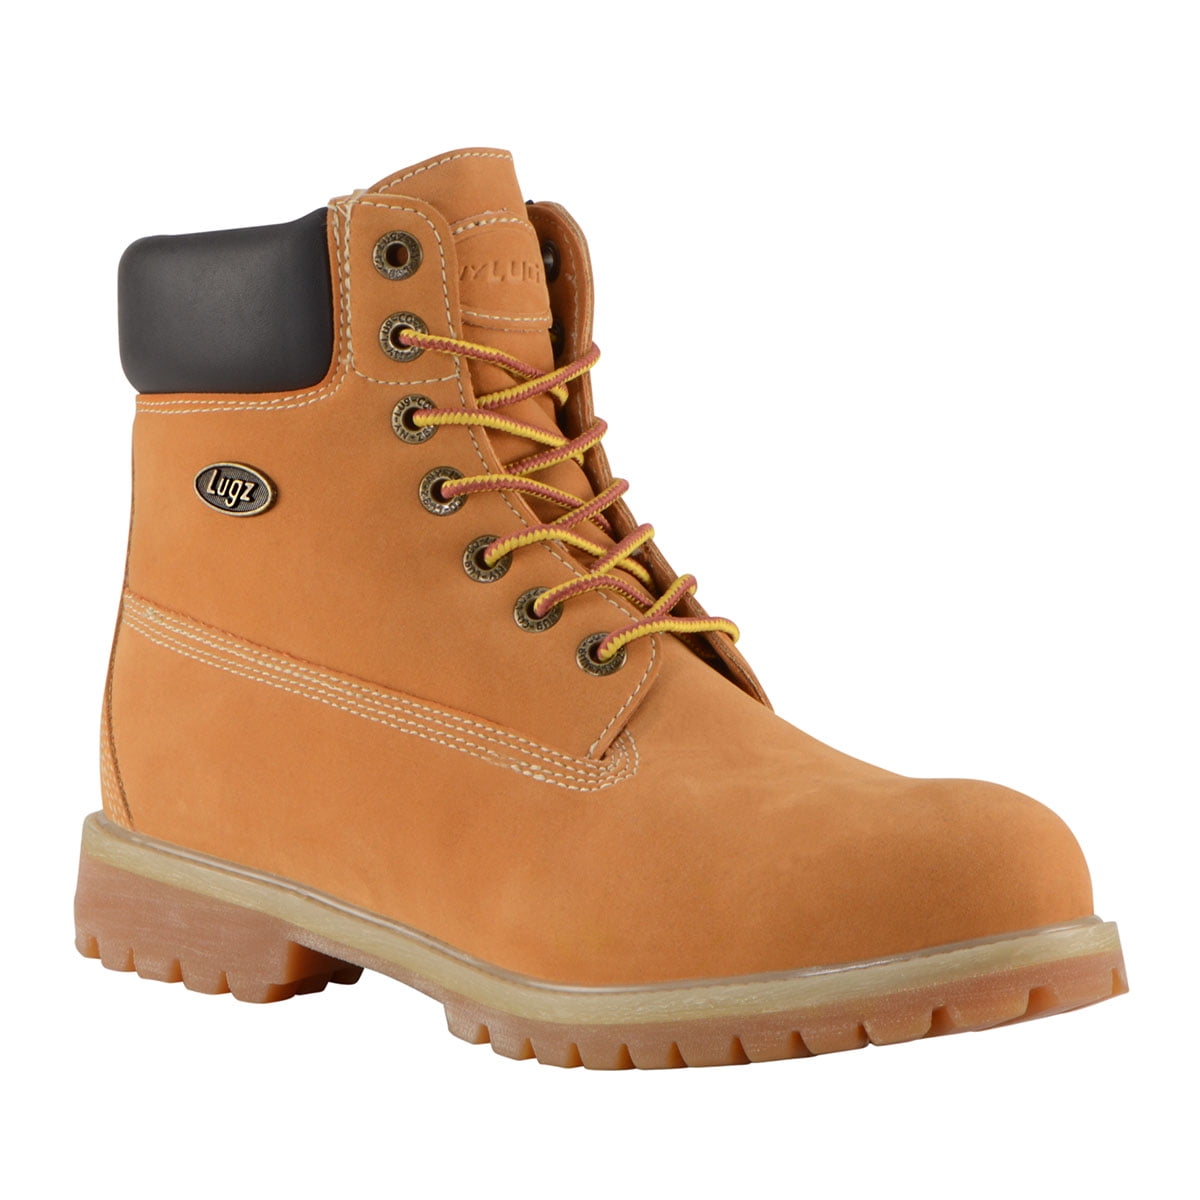 lugz boots price